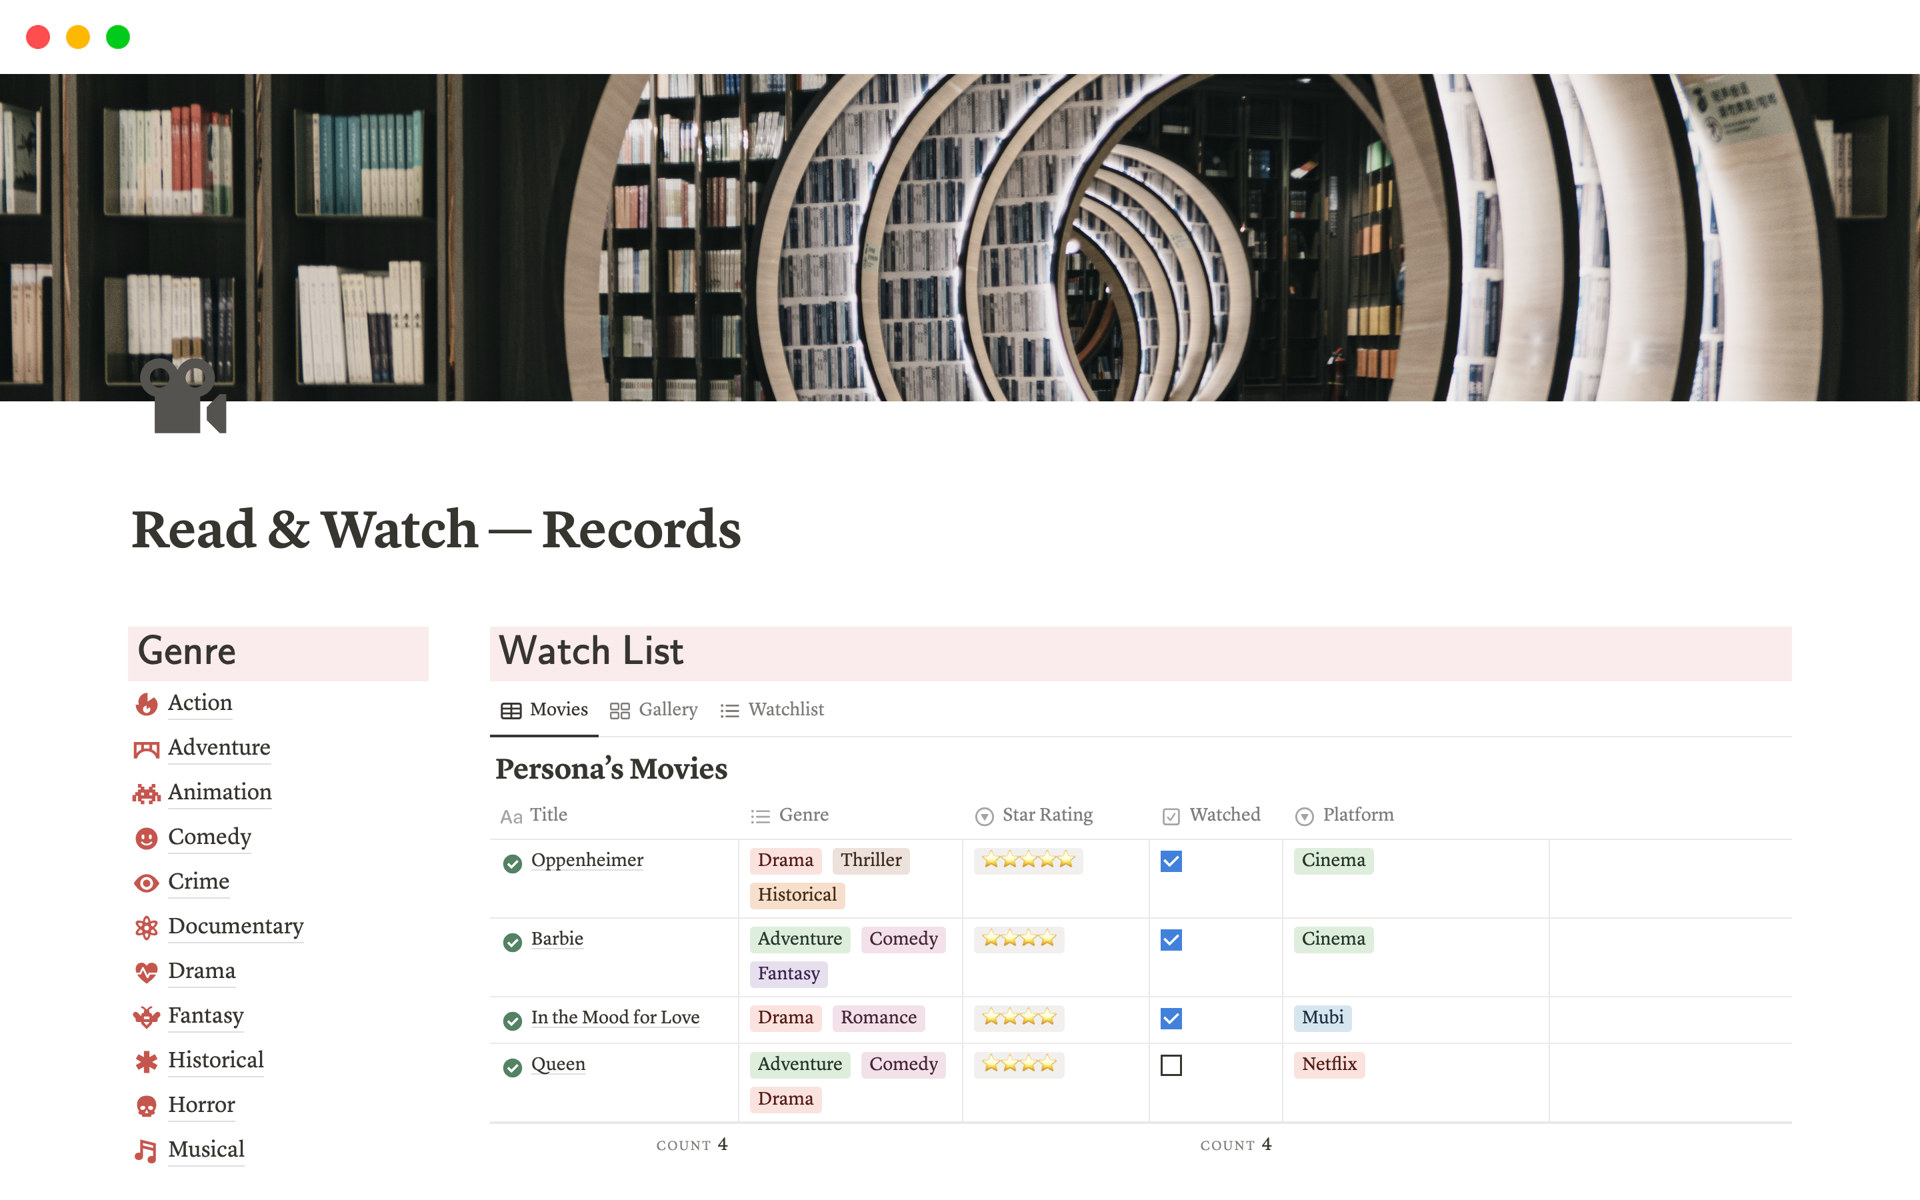 User-friendly read & watch records template is designed to help you record and organize all the books you've read and the movies or shows you've watched in one convenient place!